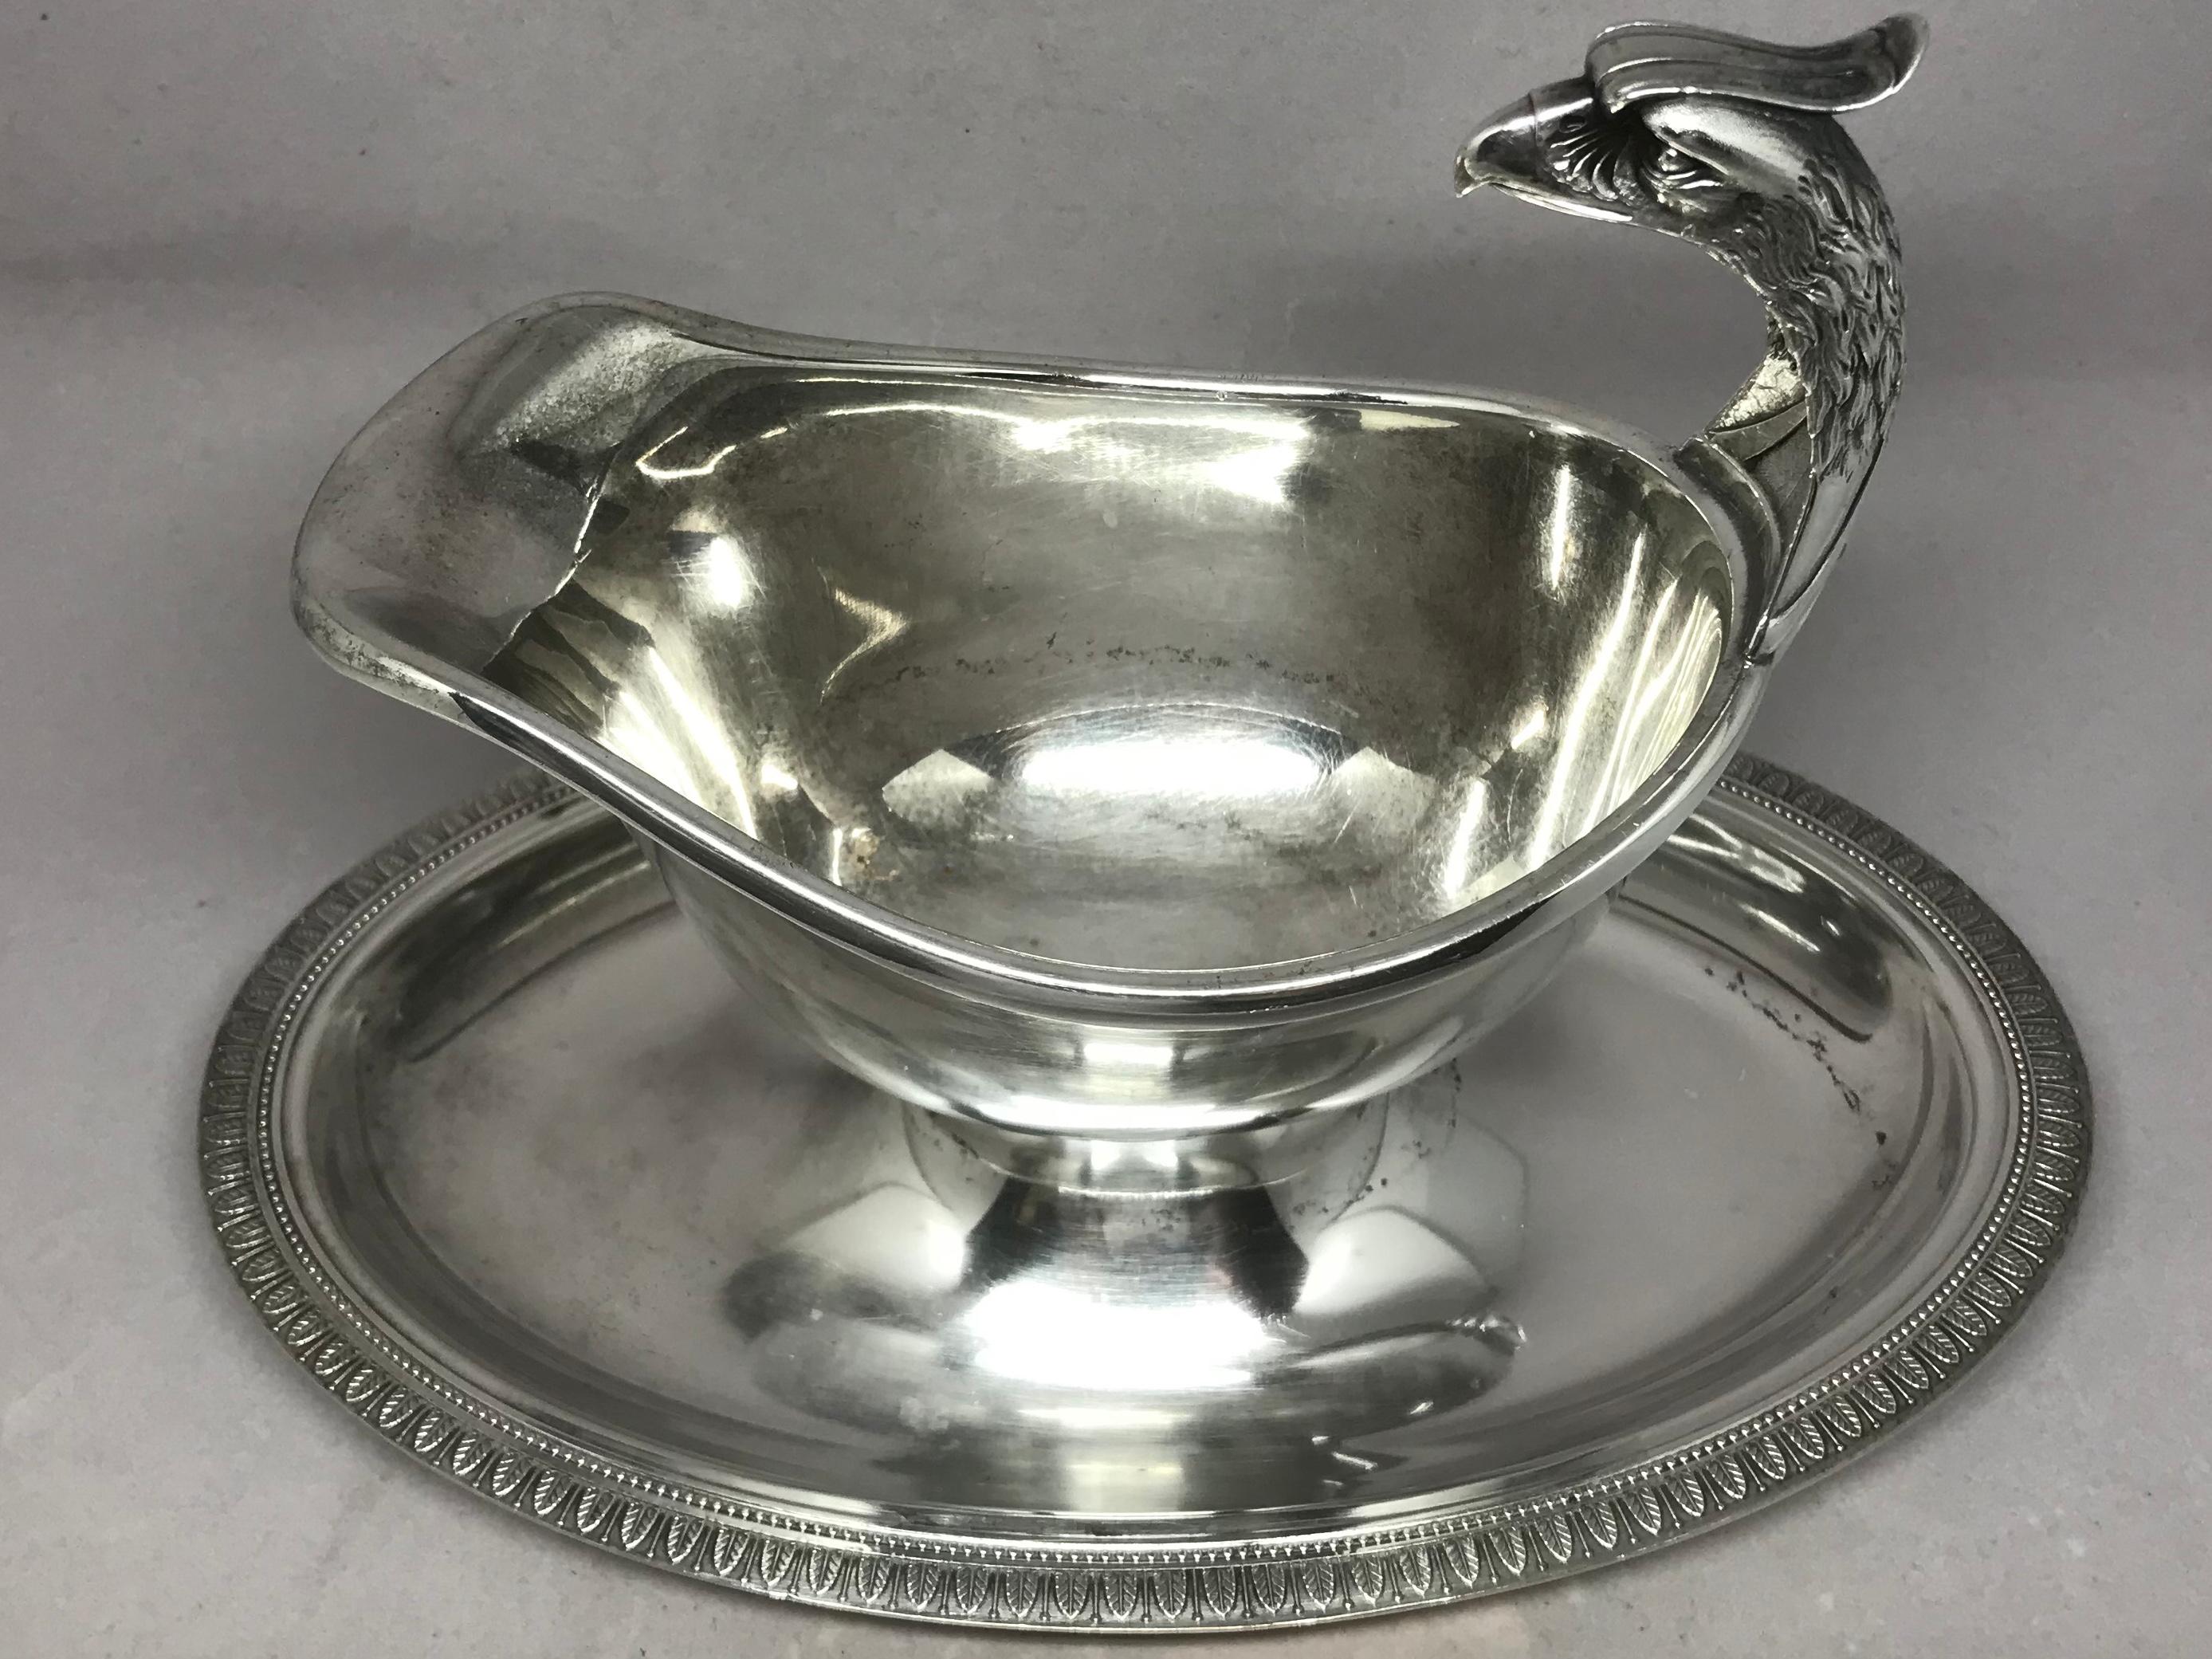 Christofle silver eagle gravy boat. Handsome eagle headed hotel silver gravy/sauce boat with attached underplate with hallmarks for Christofle, France, 20th century.
Dimensions: 9.25